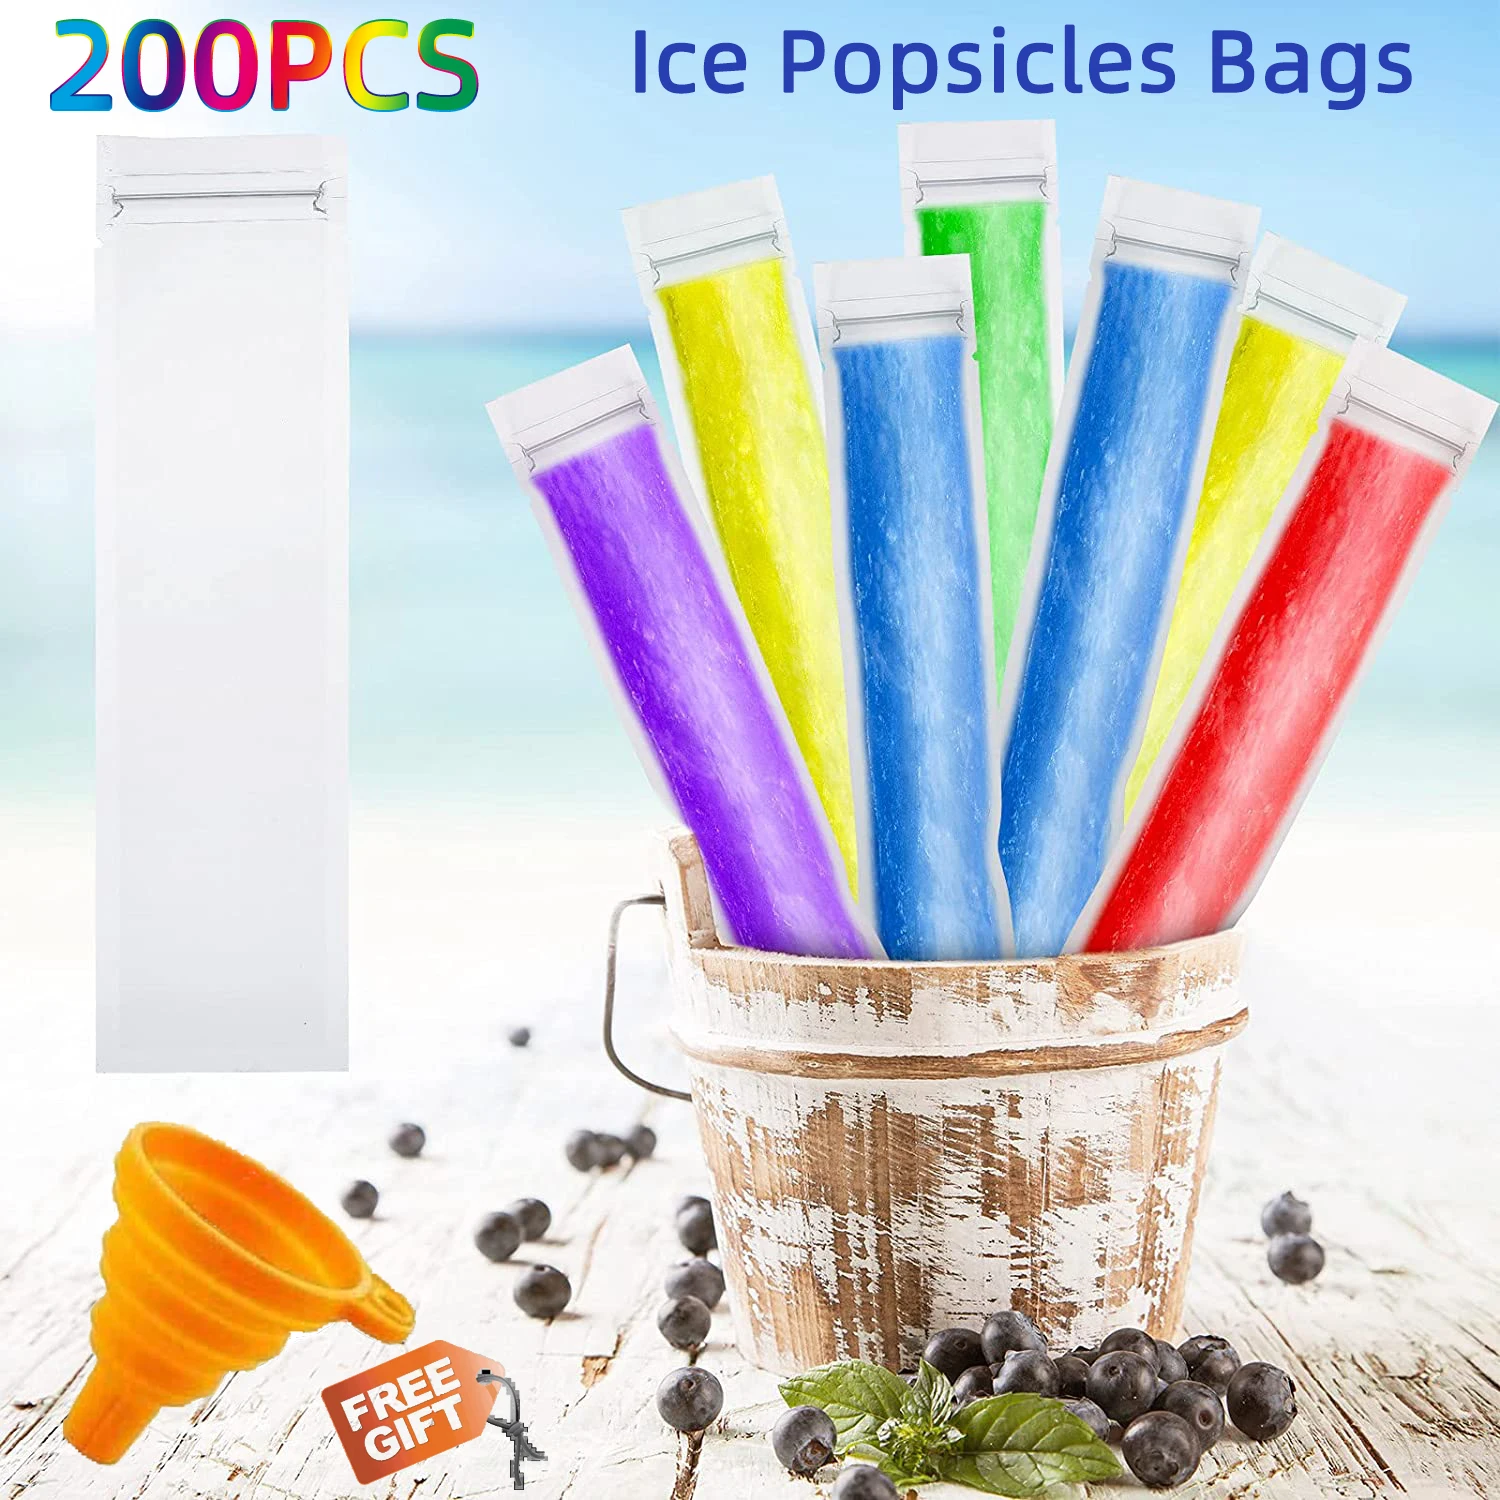 

200 Pcs Disposable Ice Popsicle Mold Bags BPA Free Zip Seals Pop Pouches with A Funnel for Yogurt Ice Cream Candy Party Favors